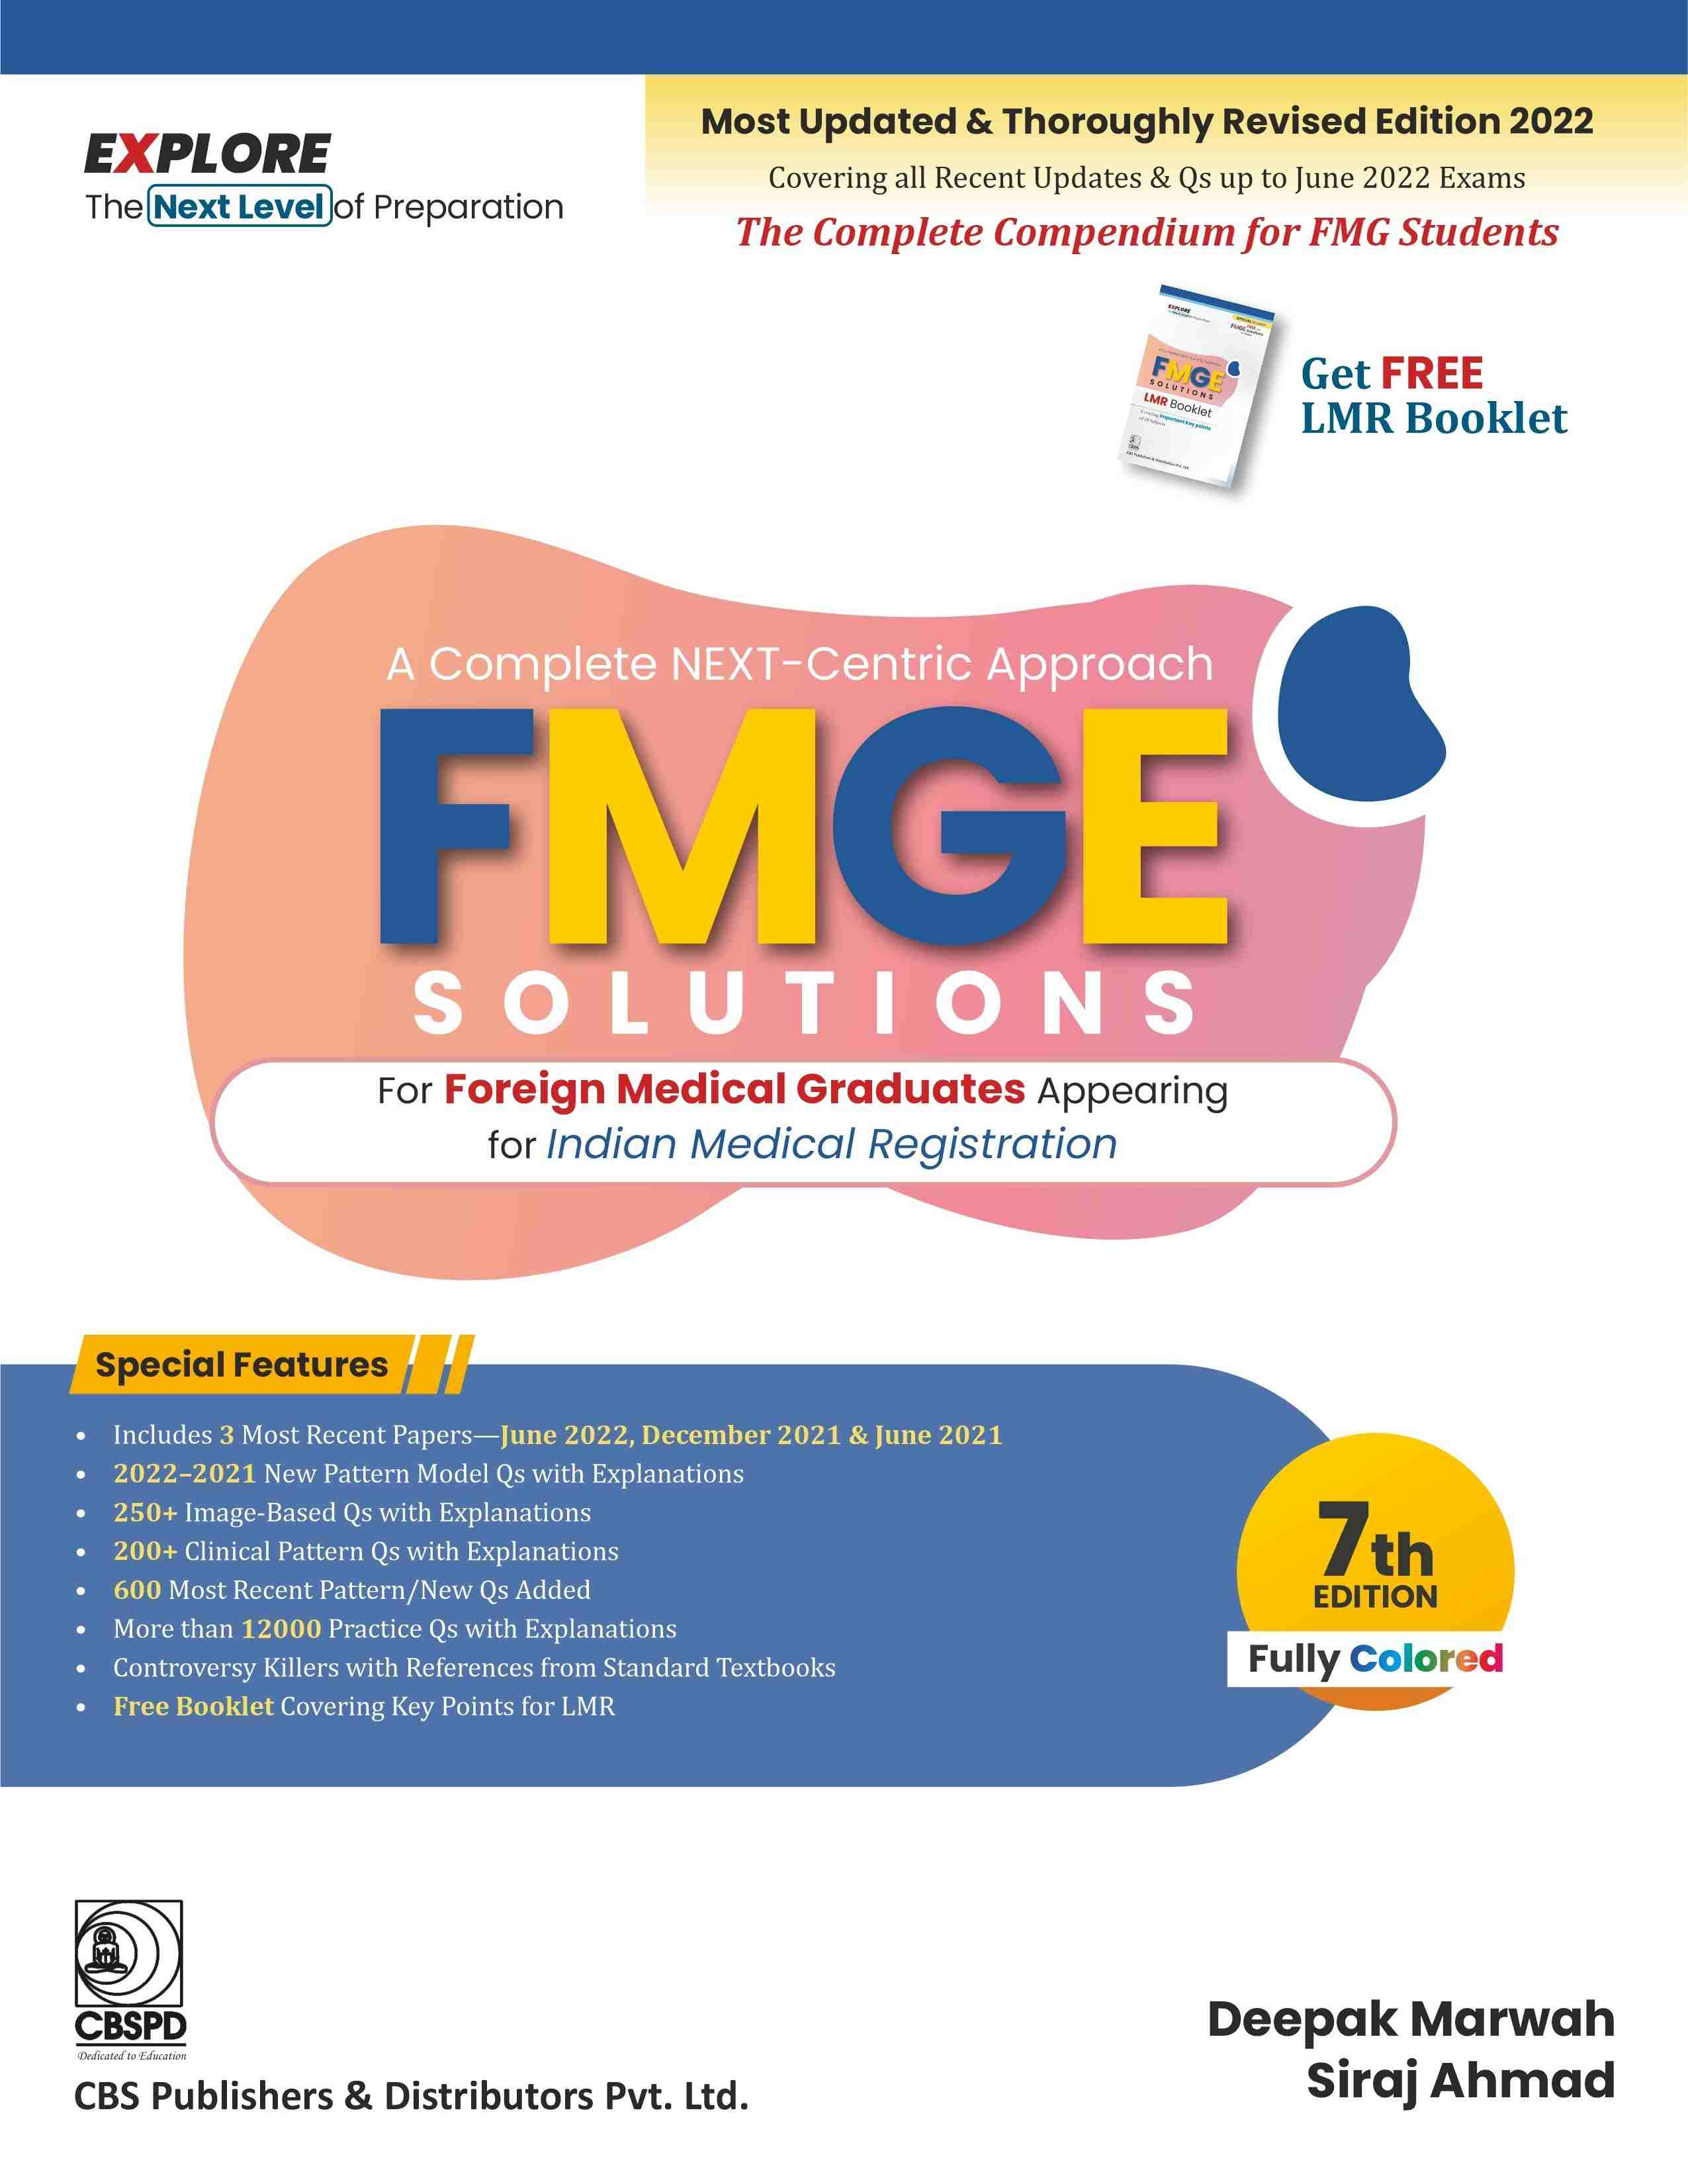 A COMPLETE NEXT CENTRIC APPROACH FMGE SOLUTIONS FOR FOREIGN MEDICAL GRADUATES APPEARING FOR INDIAN MEDICAL REGISTRATION 7ED WITH BOOKLET- ISBN: 9789390619313